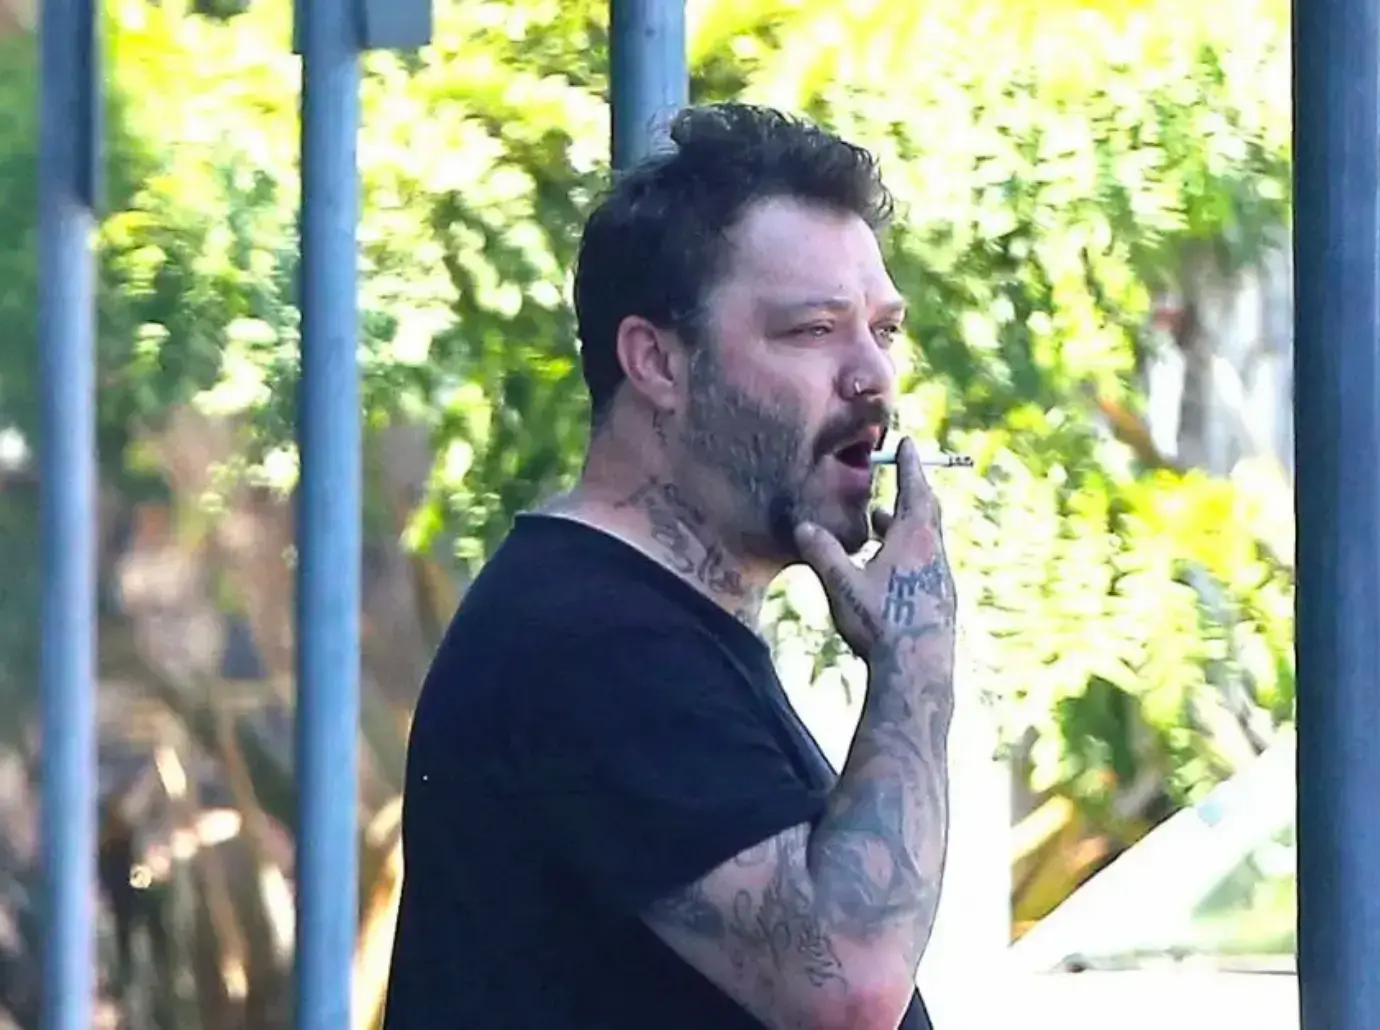 Bam Margera Threatened To Kill Man With Brass Knuckles Report